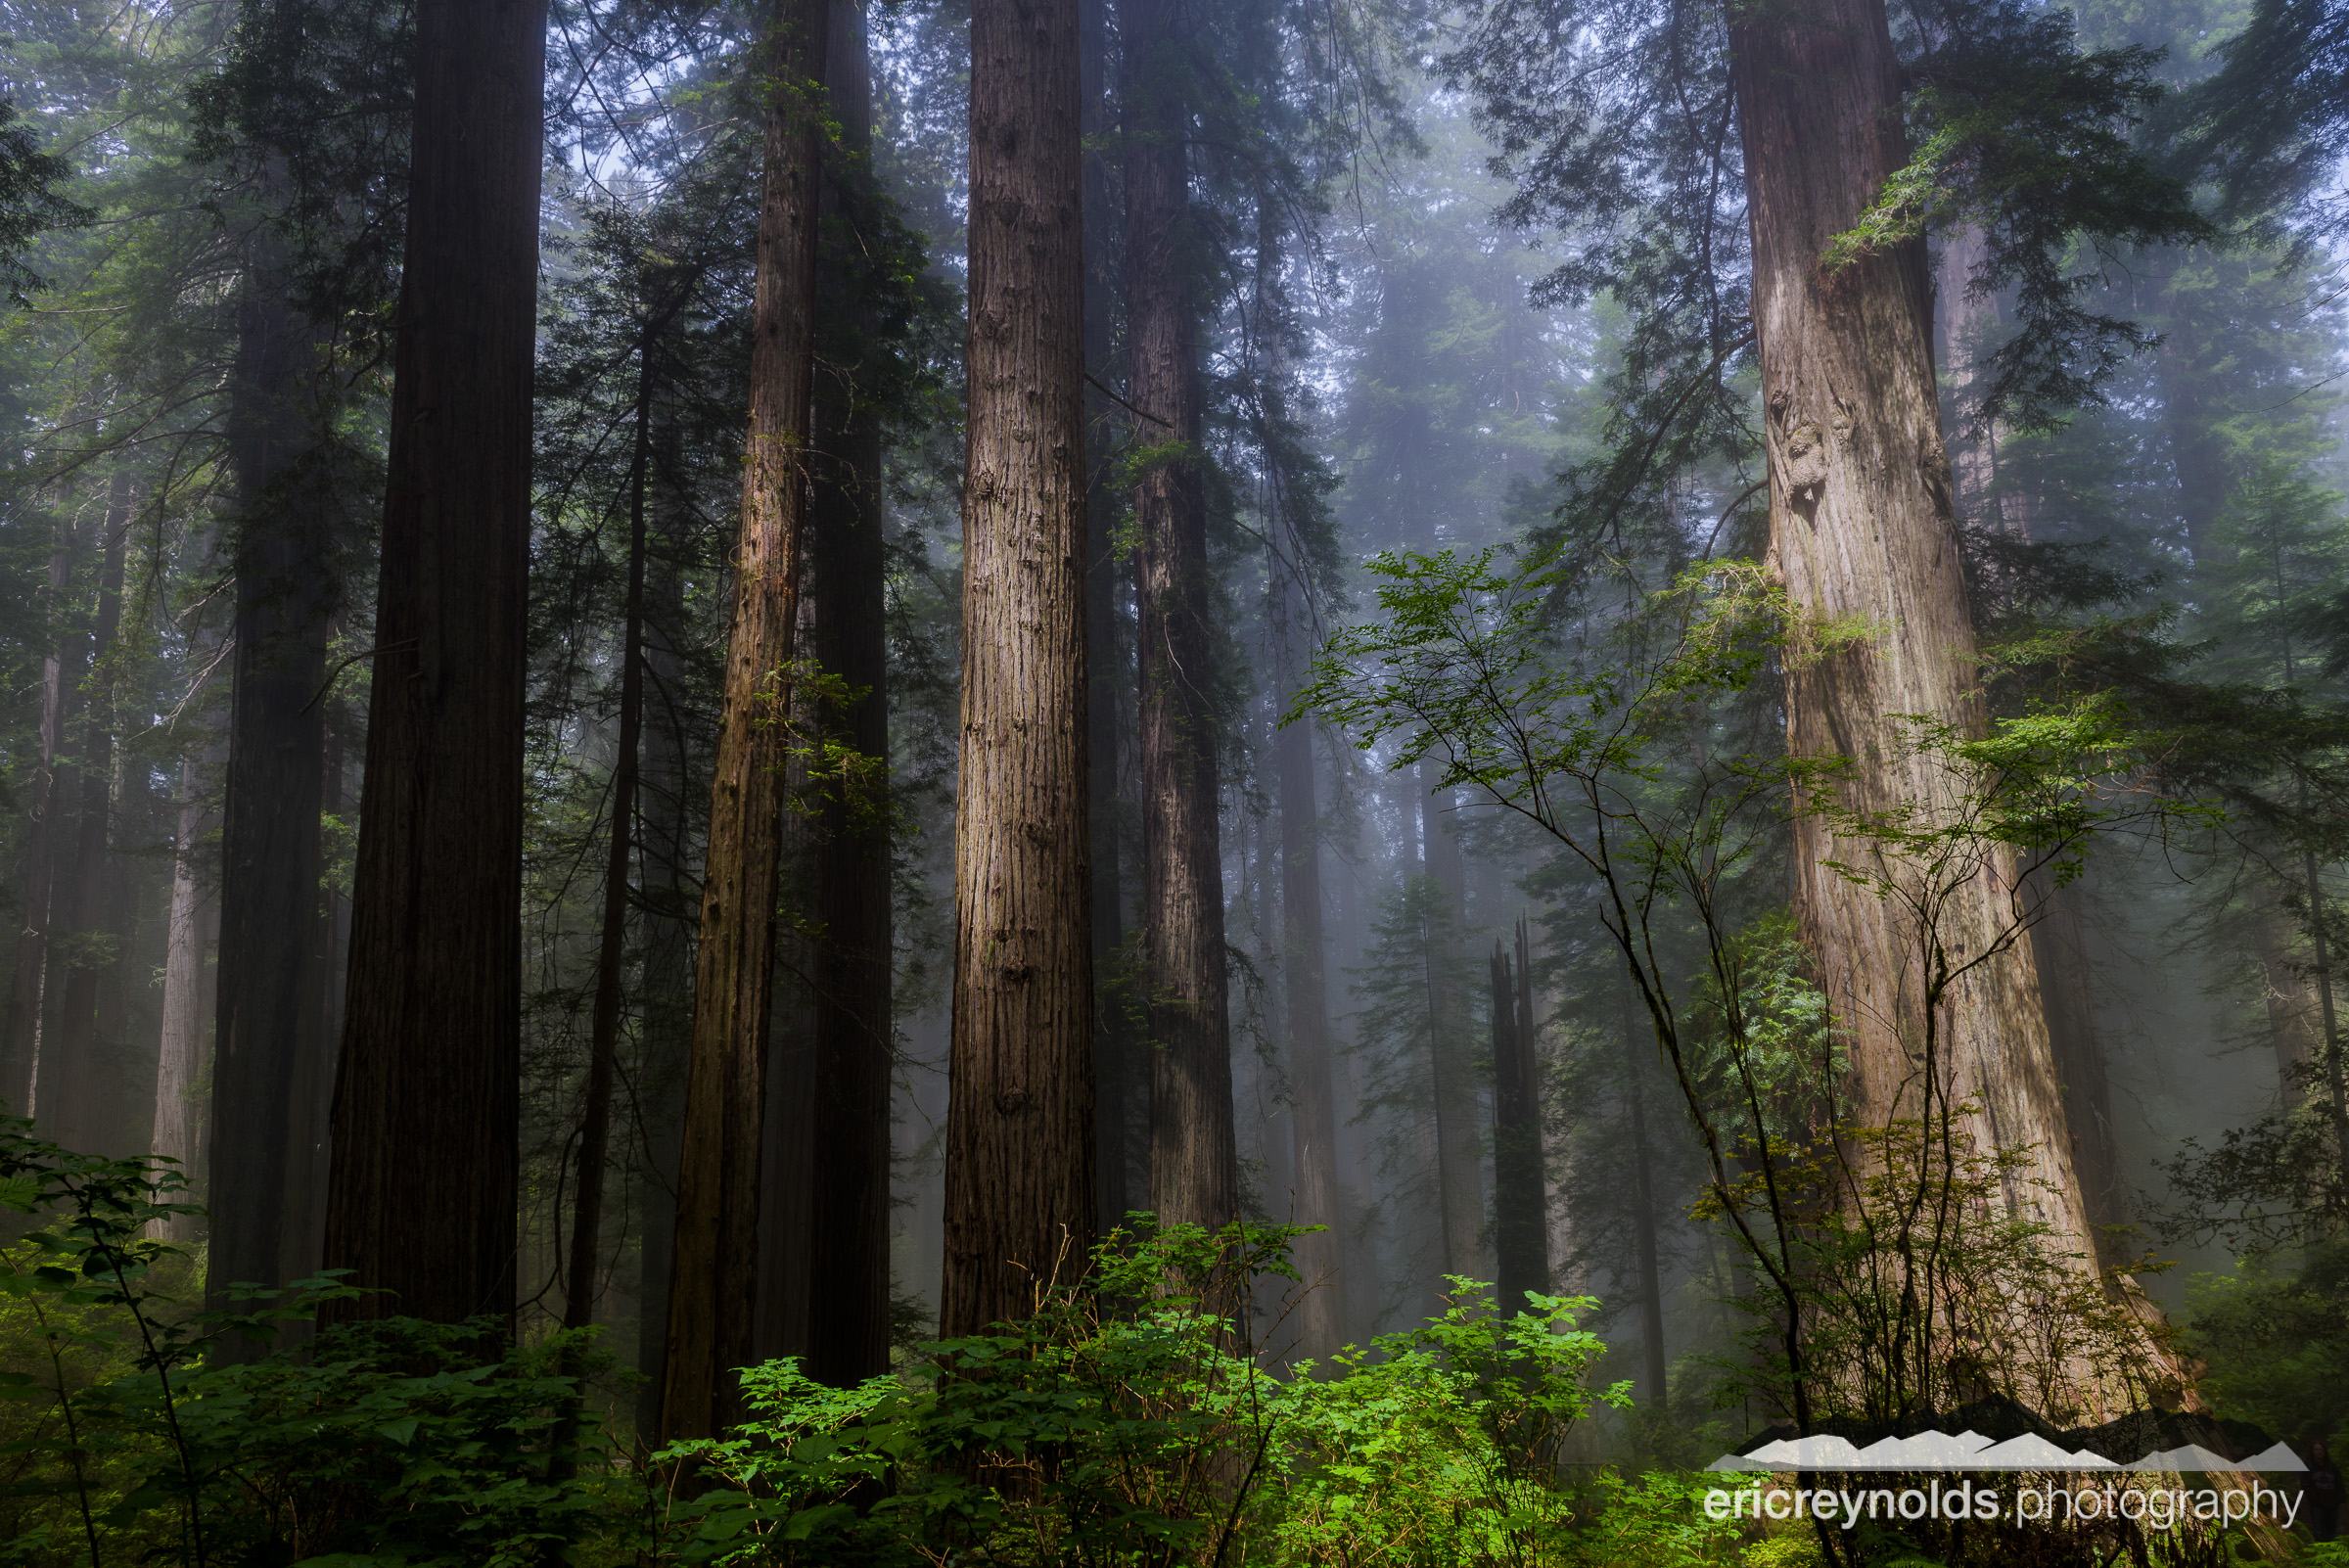 Giants of the Redwoods by Eric Reynolds - Landscape Photographer